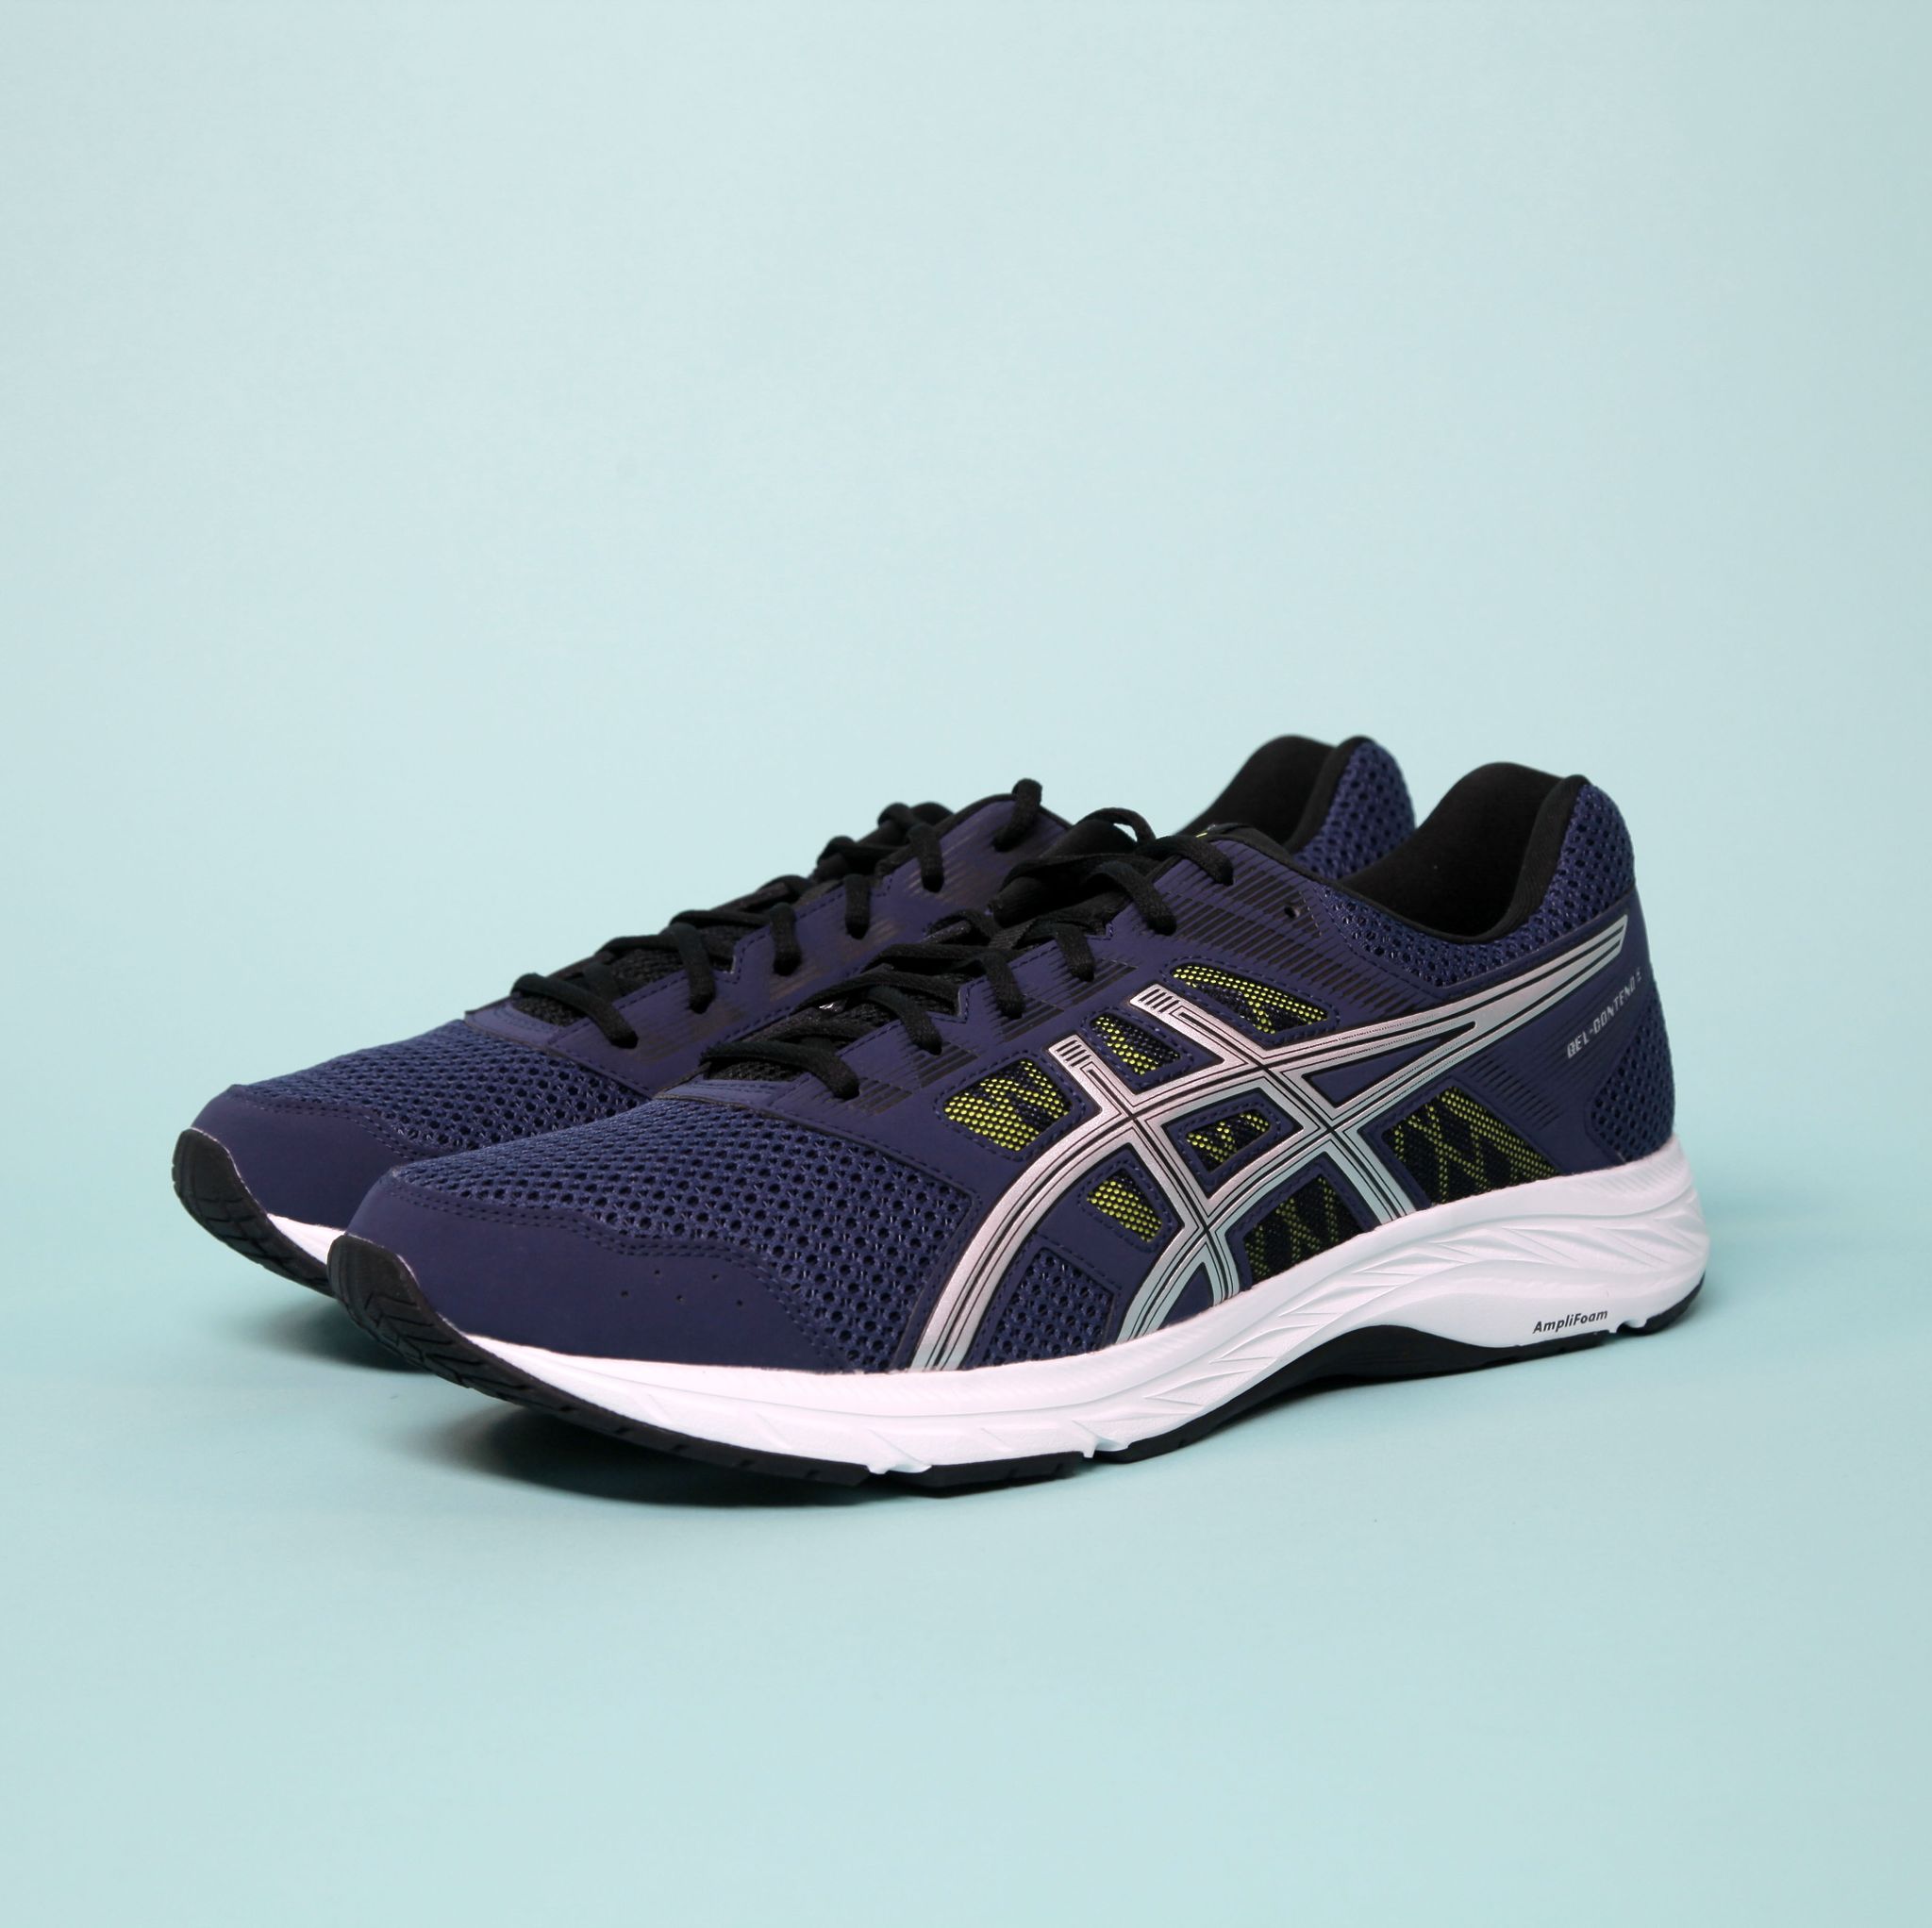 This £55 Asics shoe won best value shoe here's why